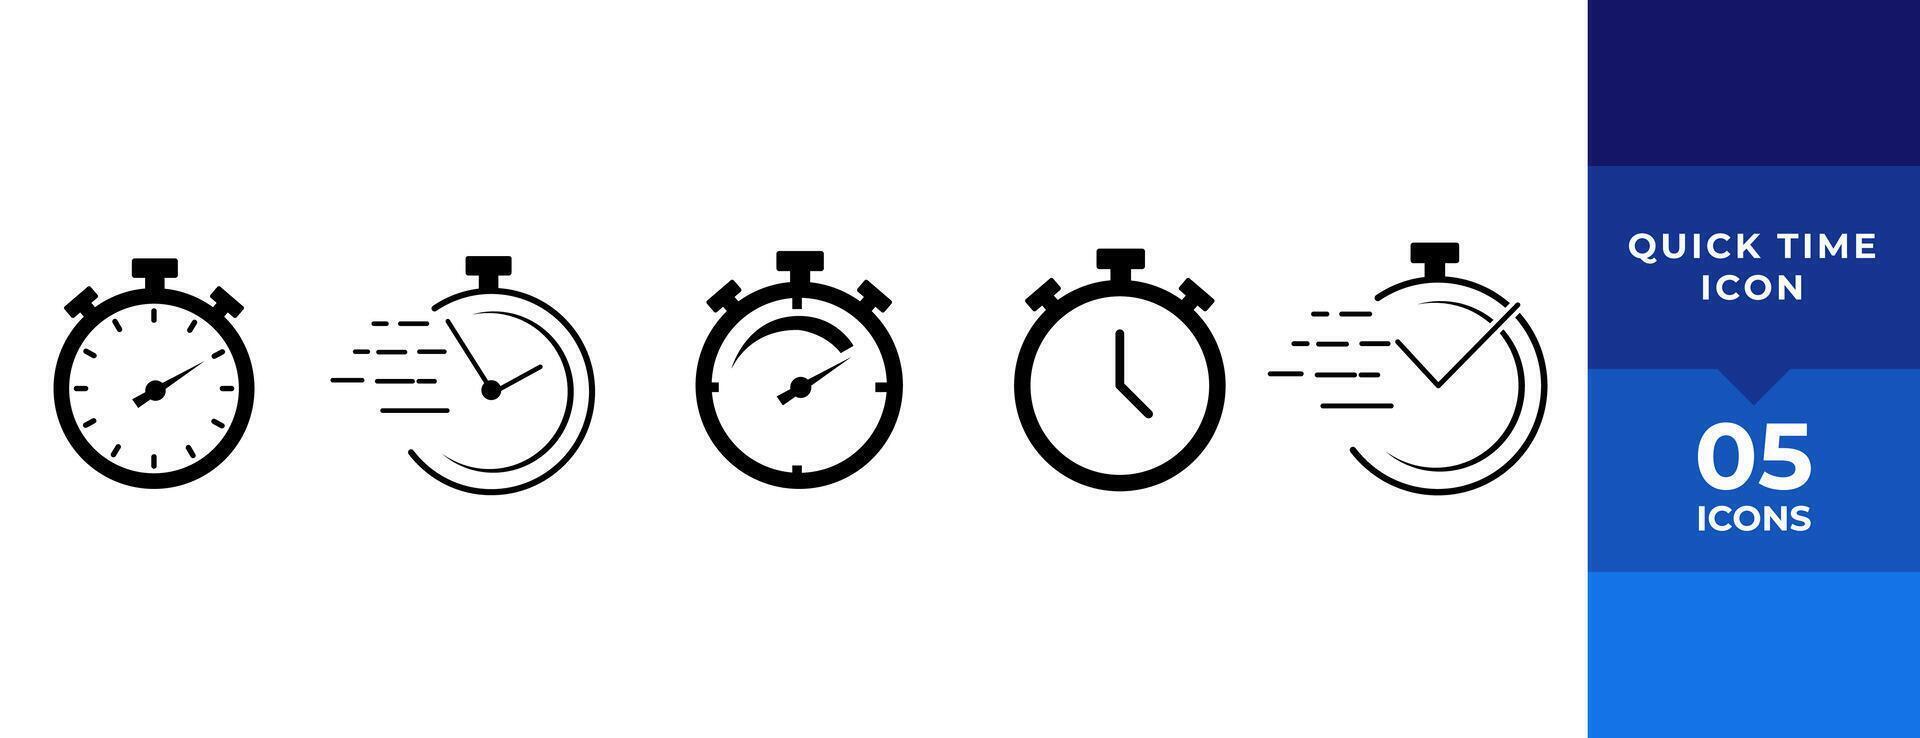 Timer icons set. Quick time or deadline icon. Express service symbol. Countdown timer and stopwatch icons isolated on white. Vector illustration.